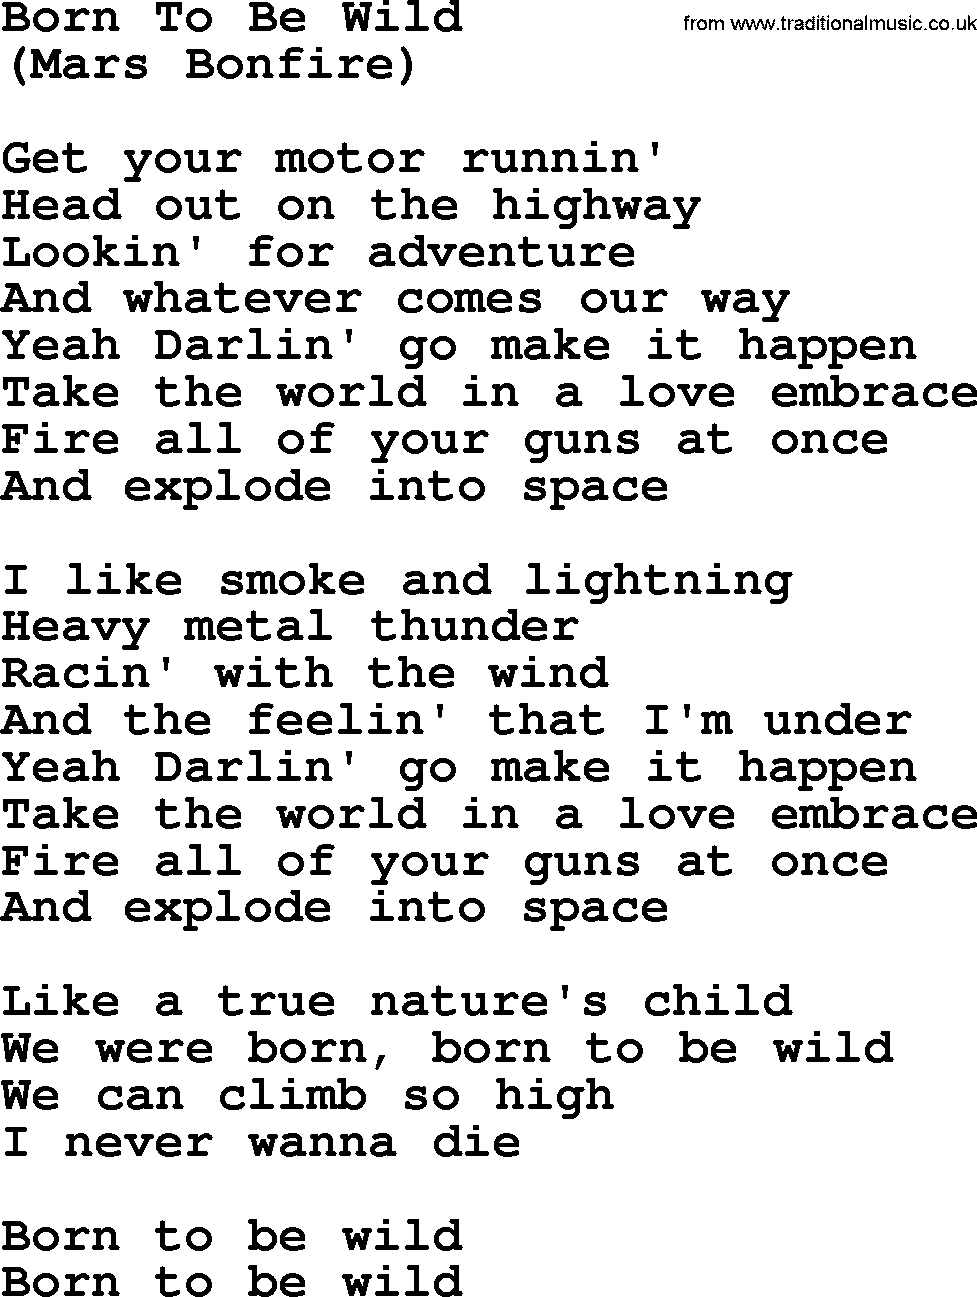 The Byrds song Born To Be Wild, lyrics